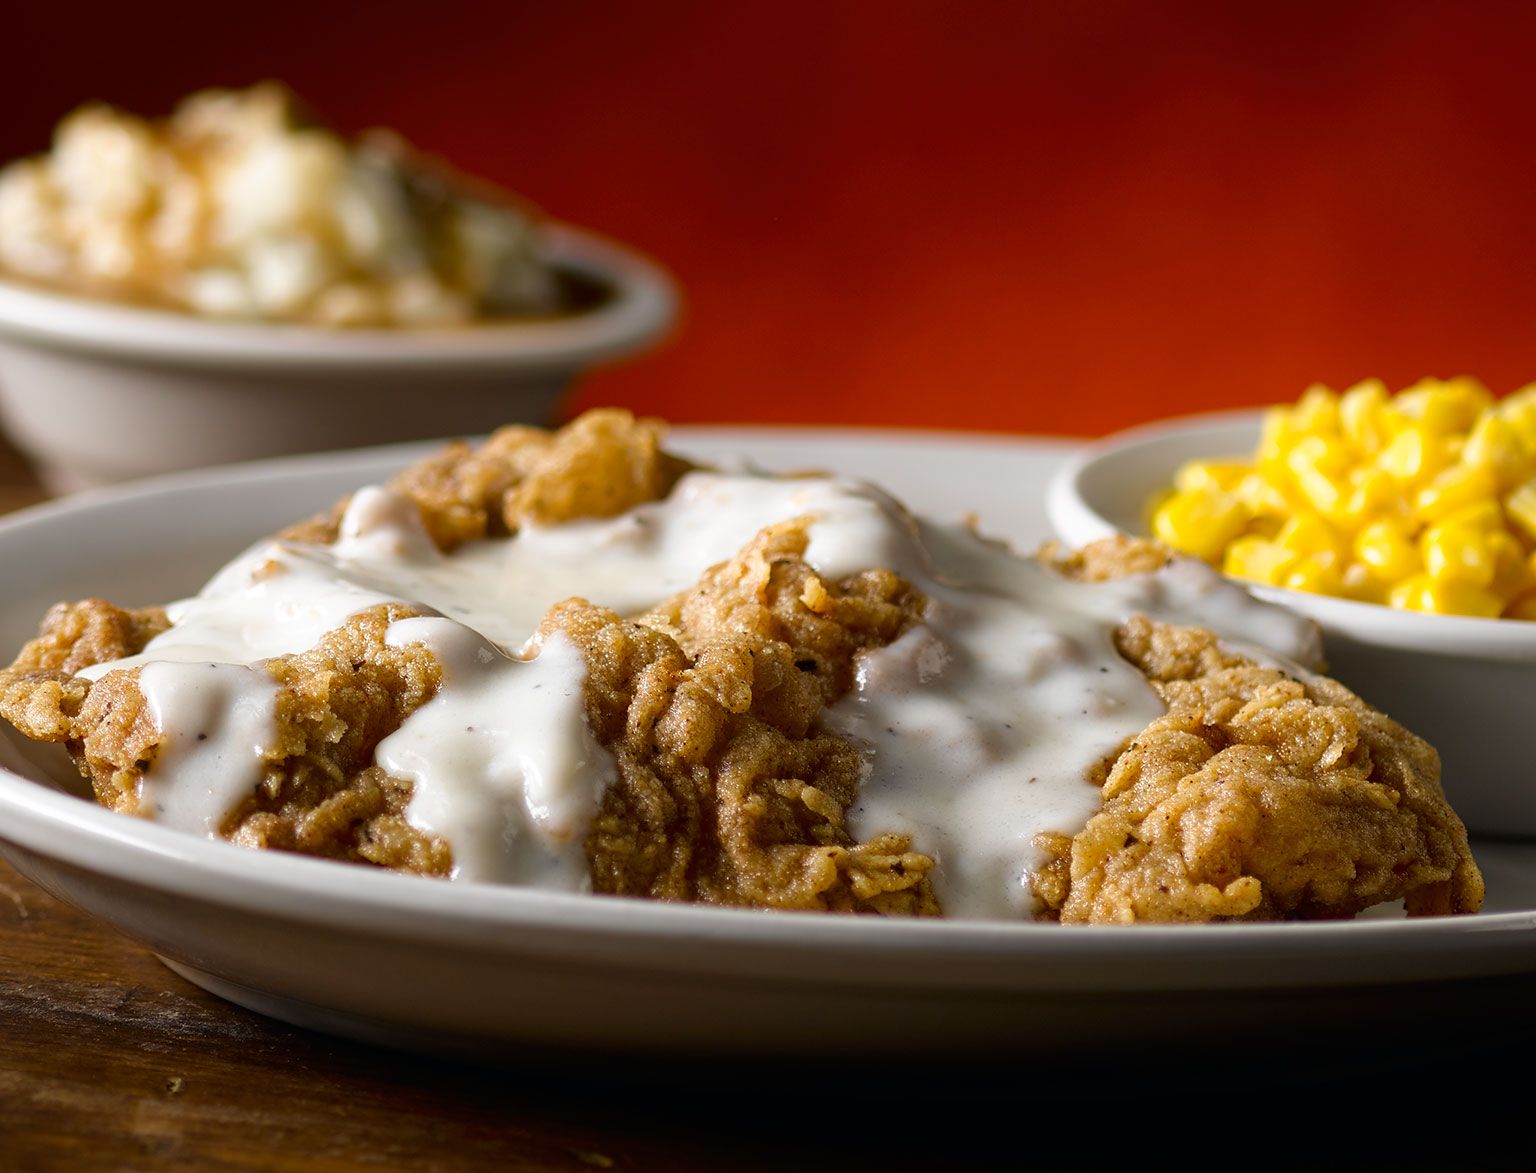 O'Charley's Offering Free Meals to Military on Veterans Day